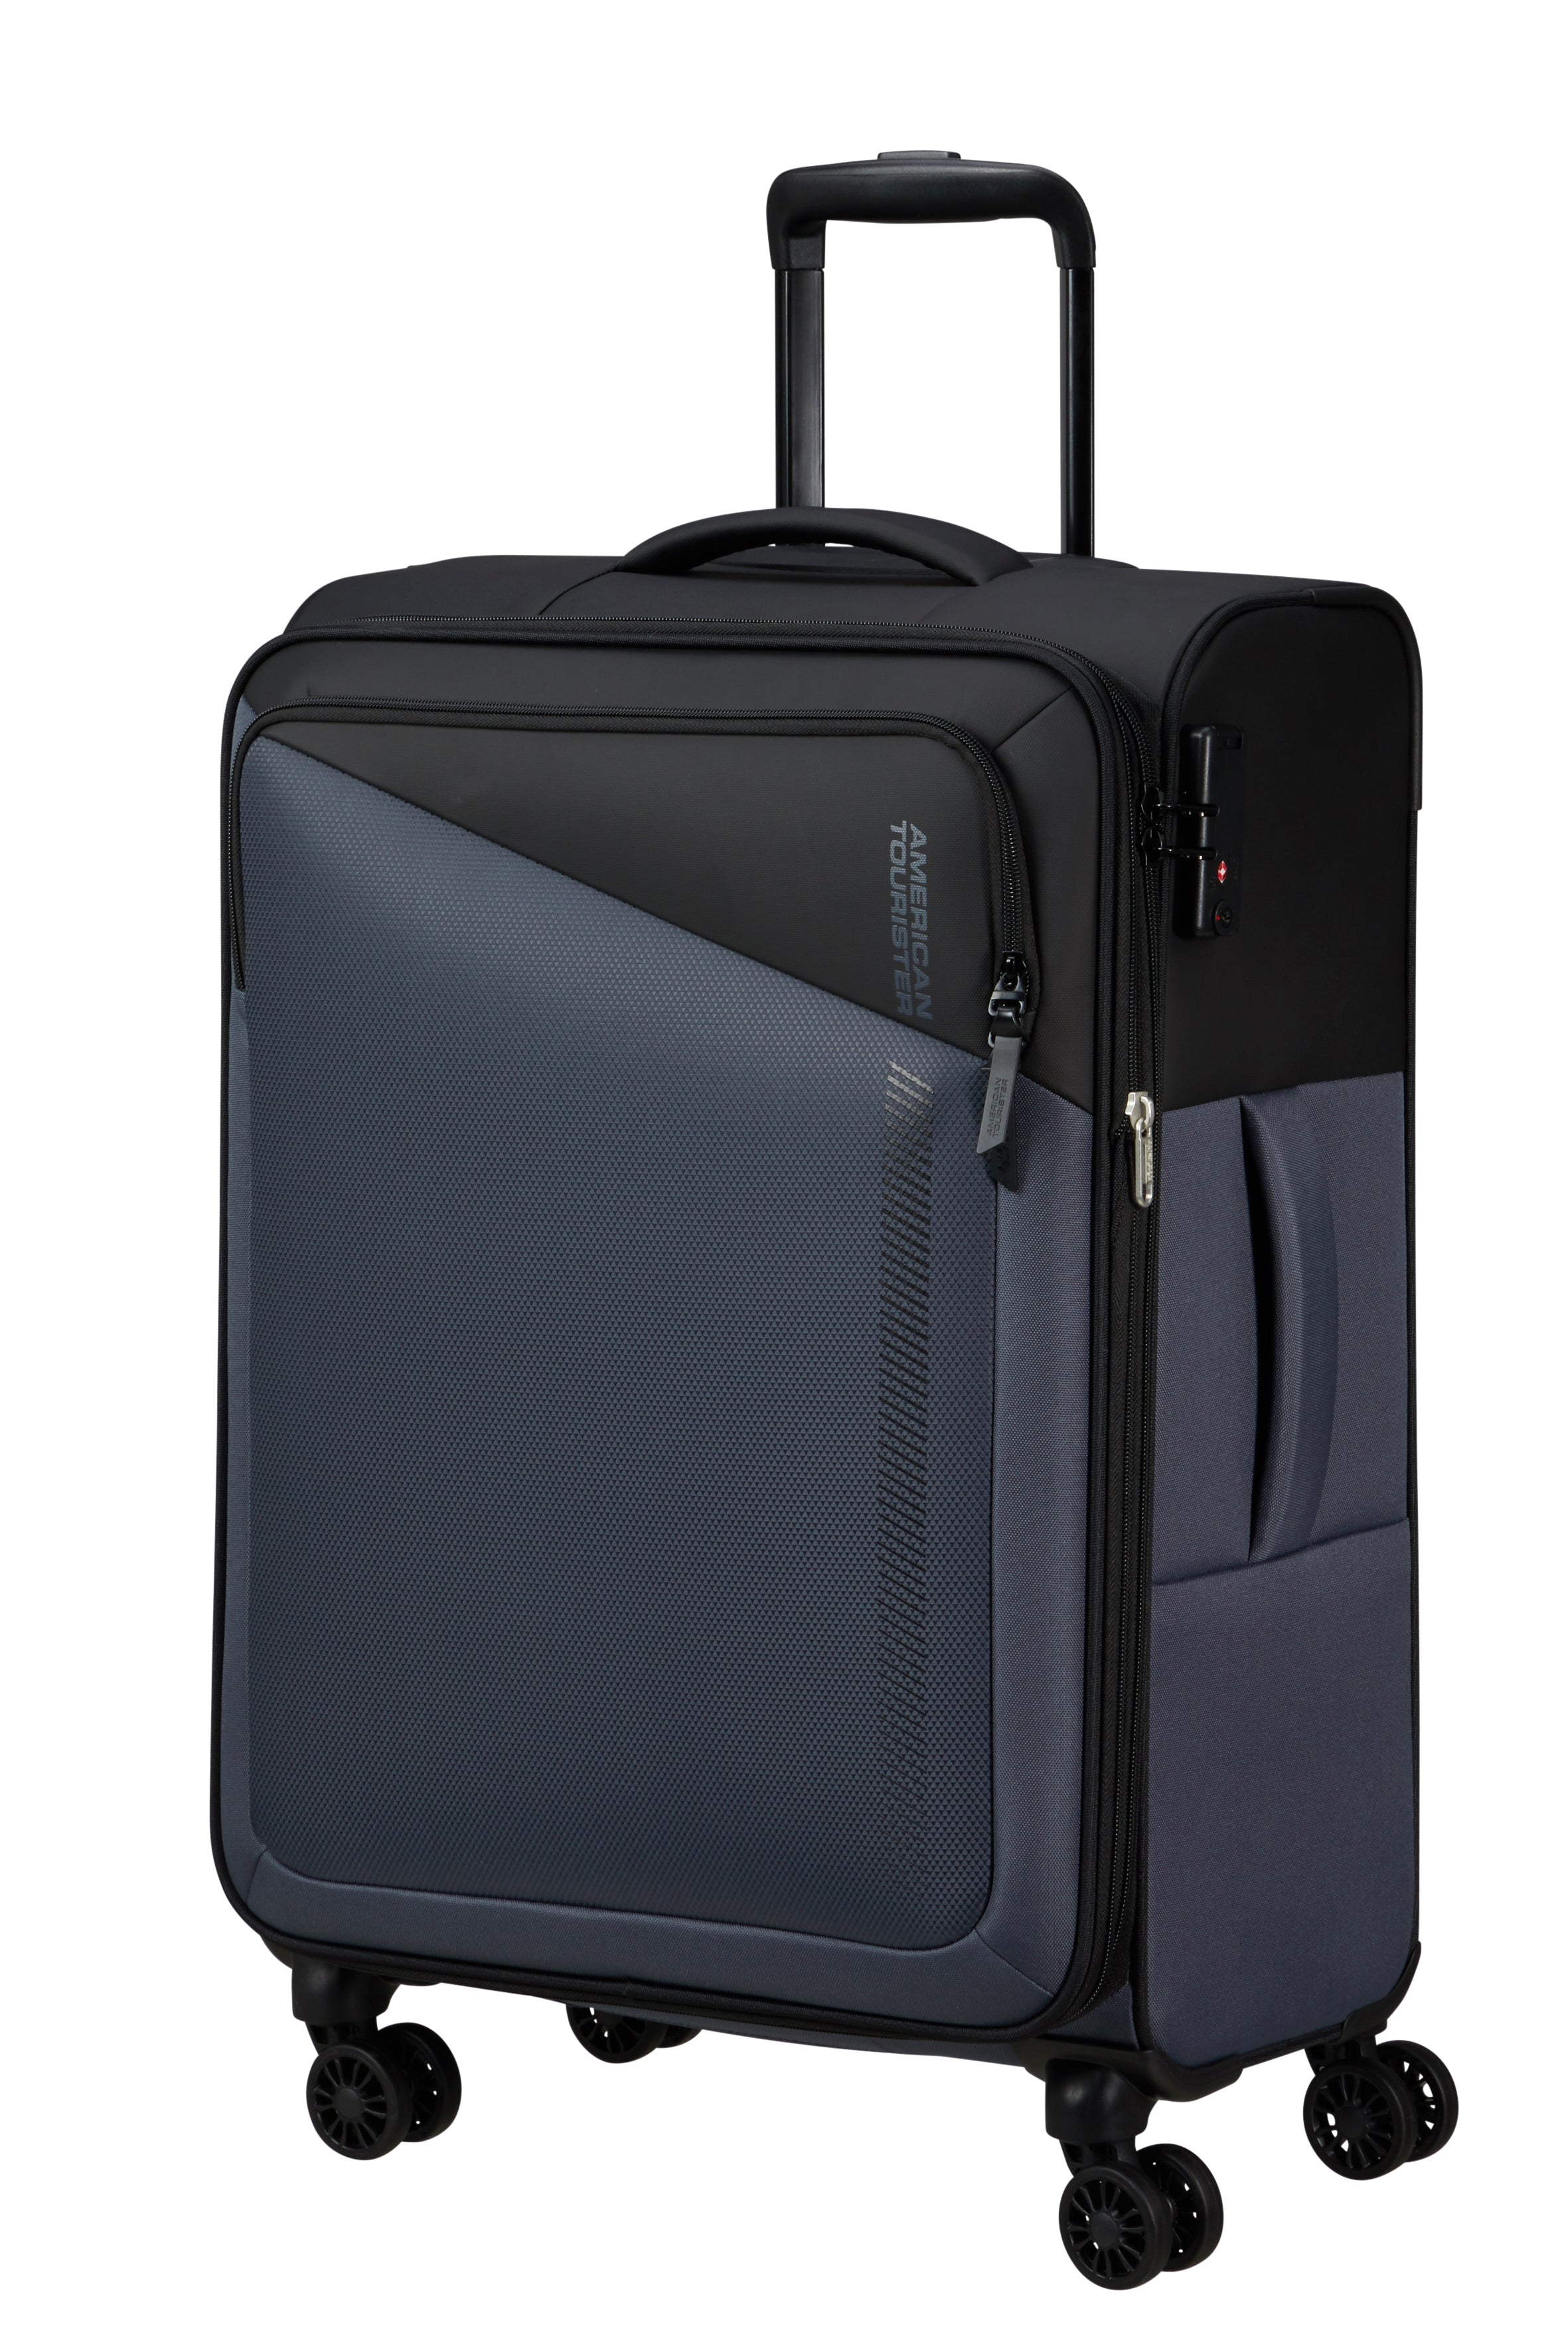 American Tourister Daring Dash Expandable 66.5 cm Spinner